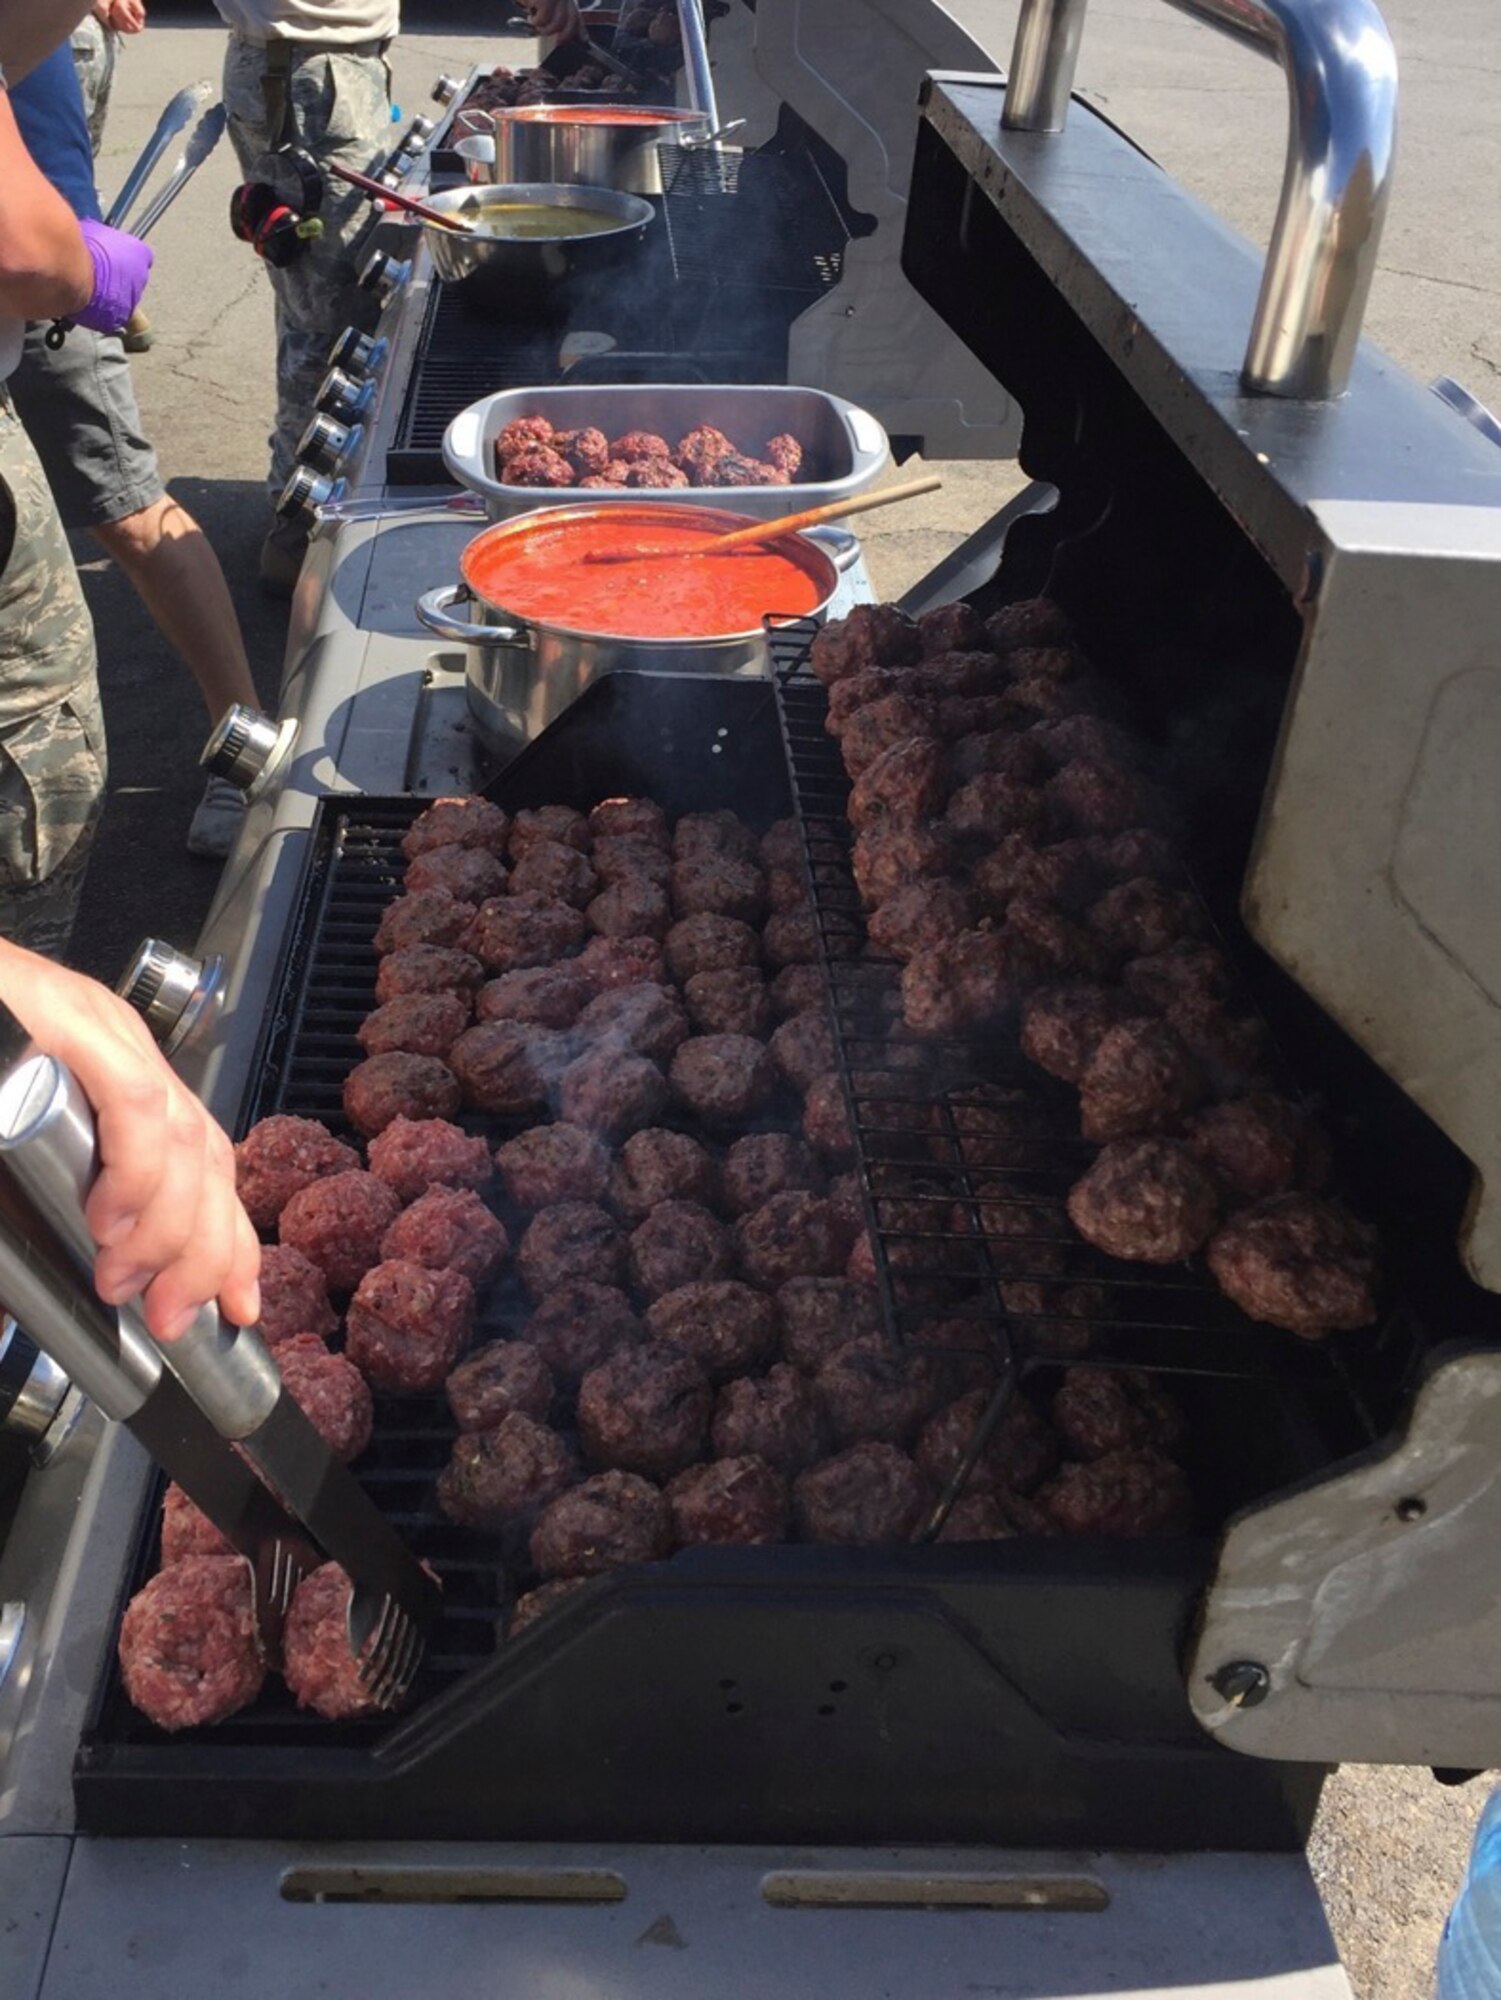 Airmen from 104th Fighter Wing prepare food on the grill during a deployment to Graf Ignatievo, Bulgaria, June 3, 2016. The Airmen are deployed with the 131st Expeditionary Fighter Squadron in support of Operation Atlantic Resolve. (U.S. Air Force Photo by Master Sgt. Adam Casineau/Released)